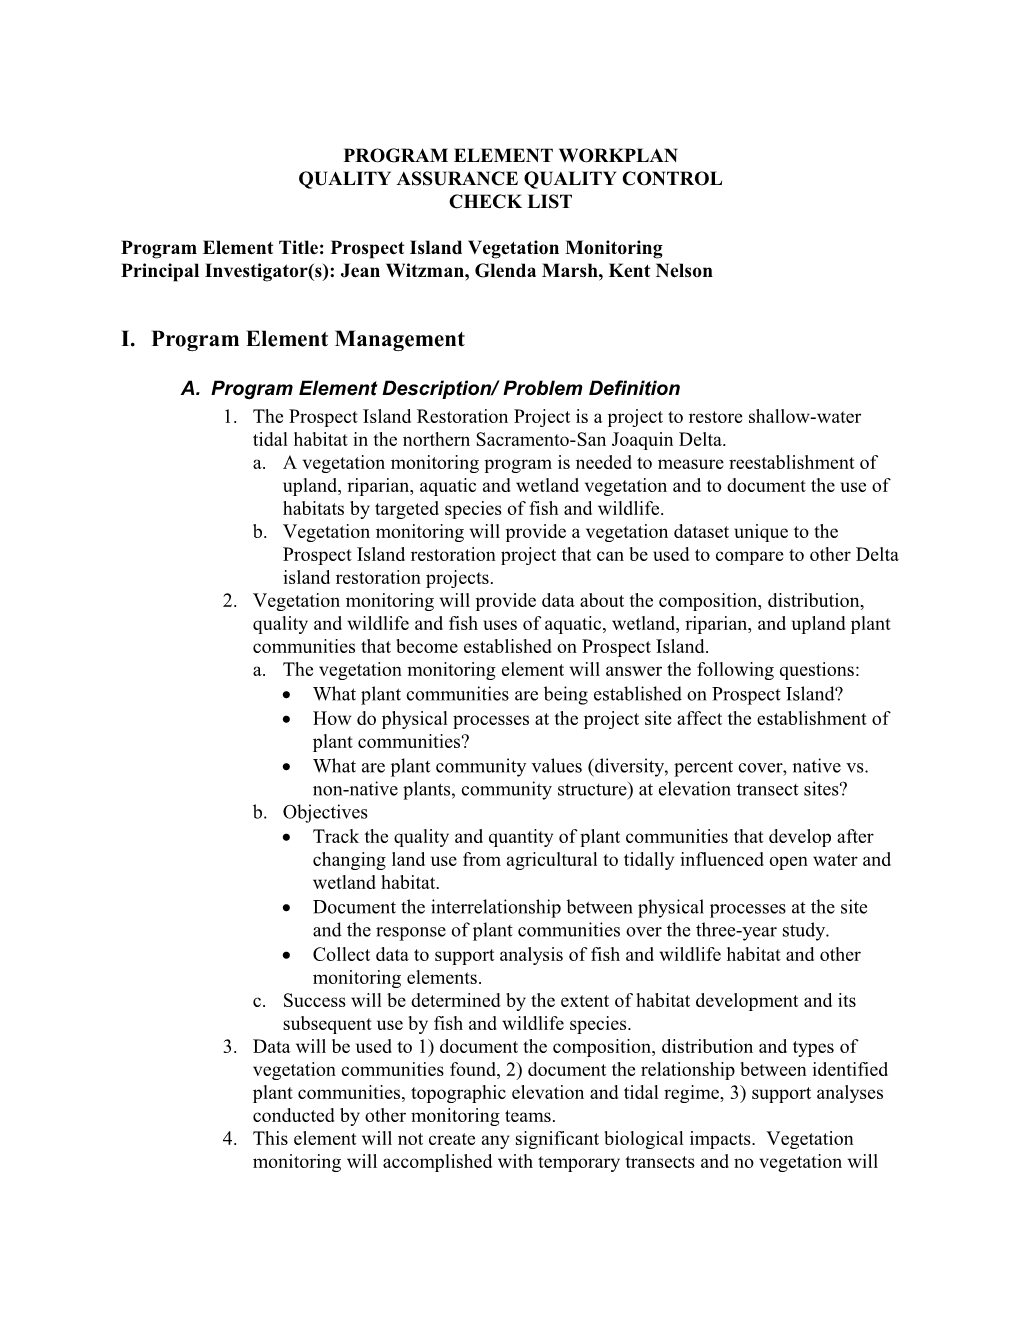 Interagency Ecological Program Quality Assurance and Quality Control Program for Collection